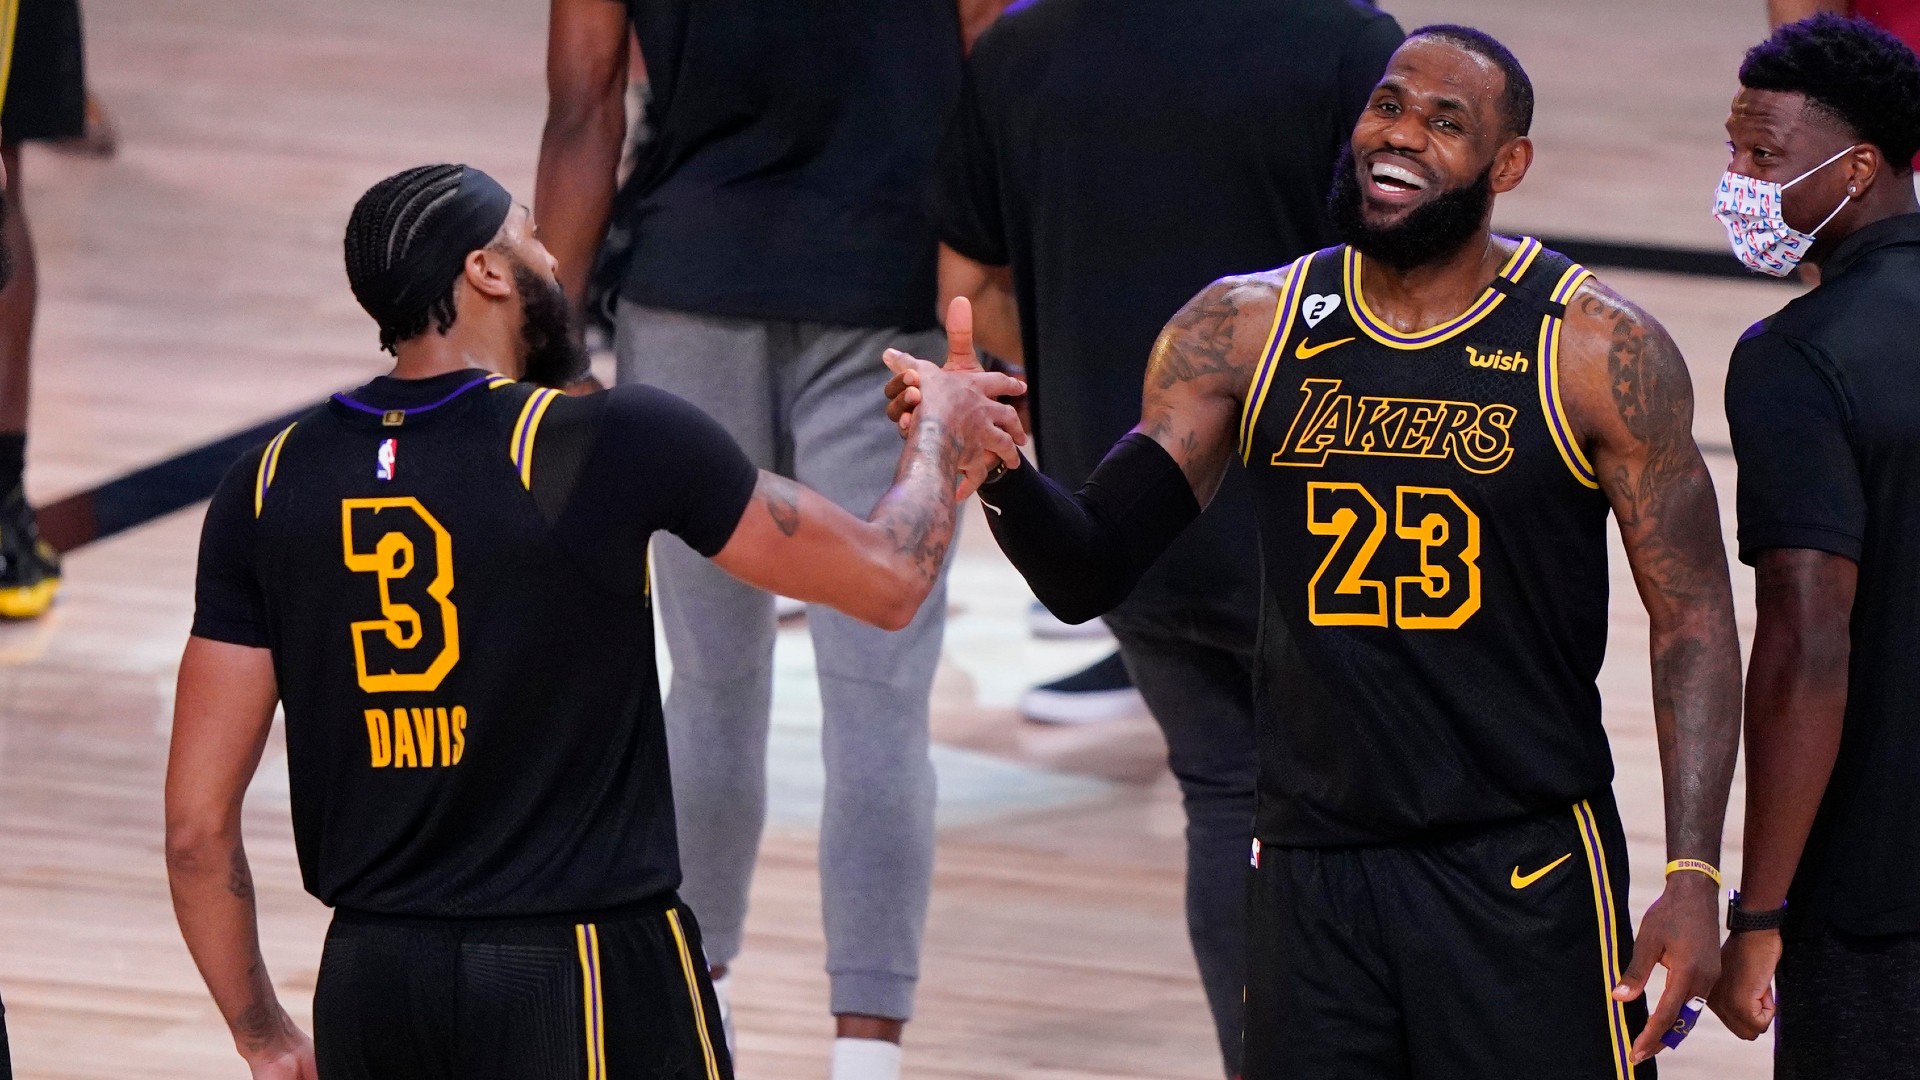 Lakers to wear Mamba jerseys in Game 5 with chance to win another title